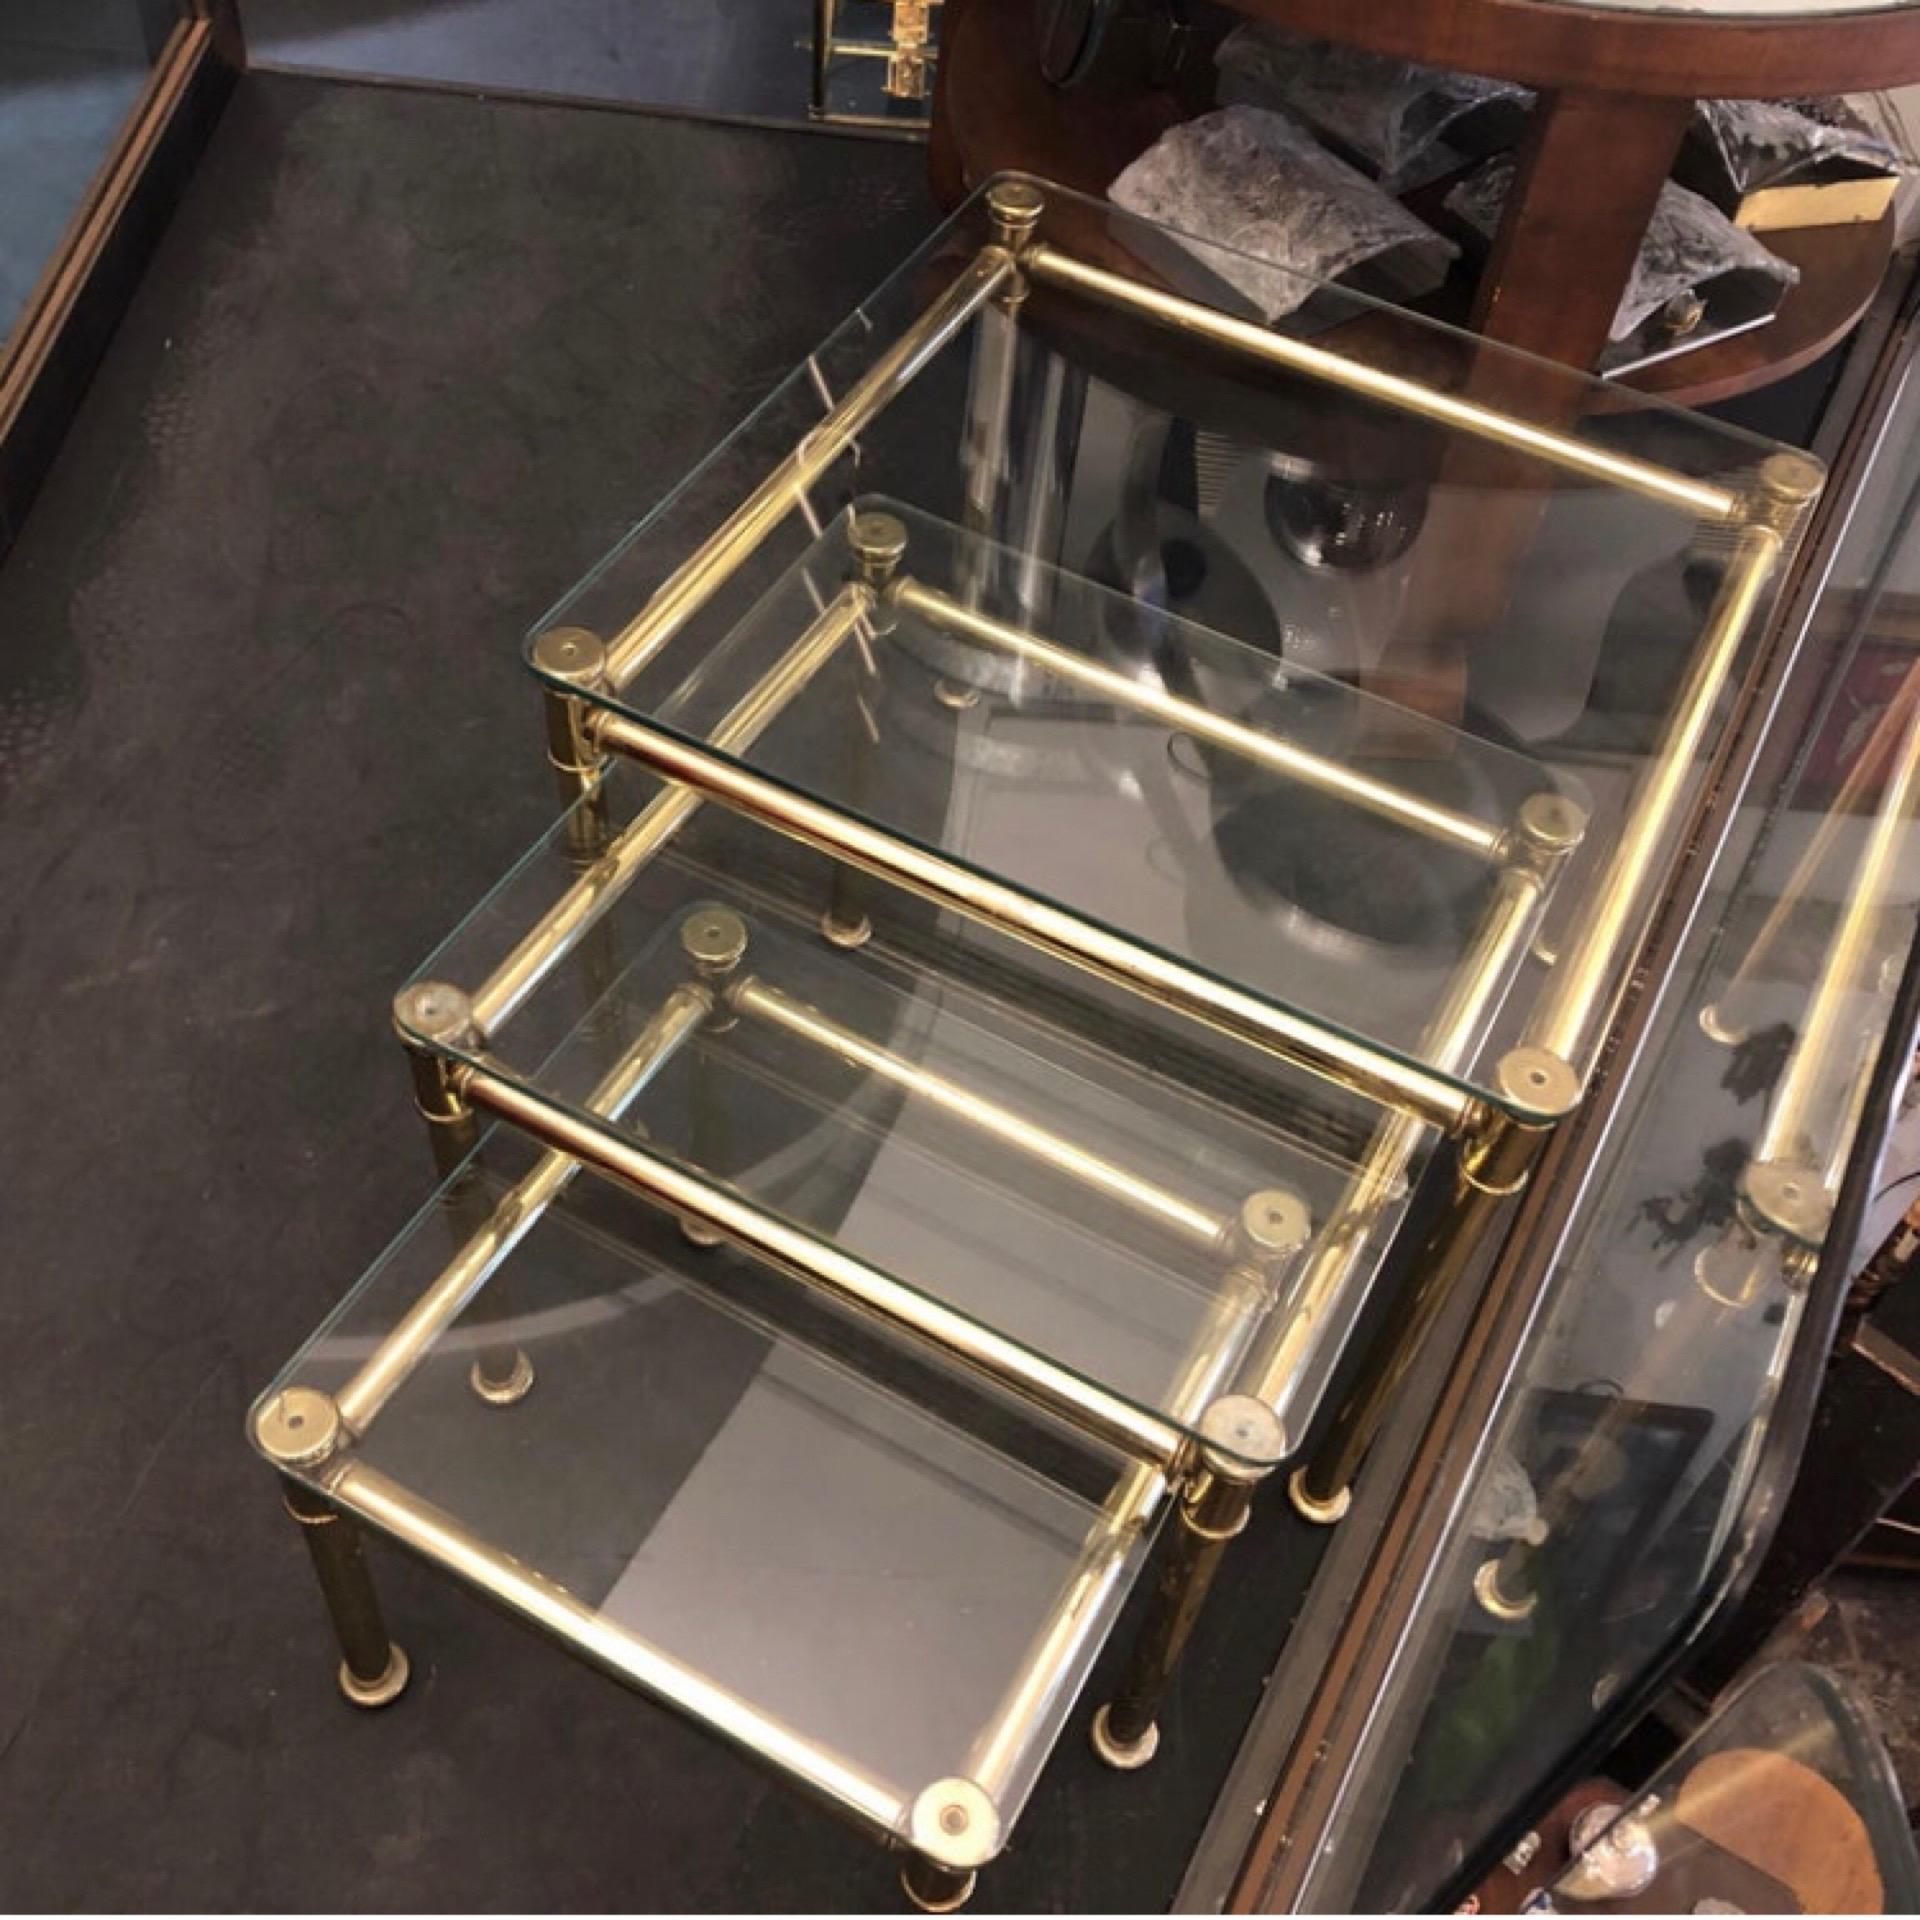 Three brass and glass nesting tables in the manner of Tommaso Barbi designed and manufactured in Italy in the 1960s. Good conditions overall. The 1960s was a significant period for Mid-Century Modern design, characterized by clean lines, geometric